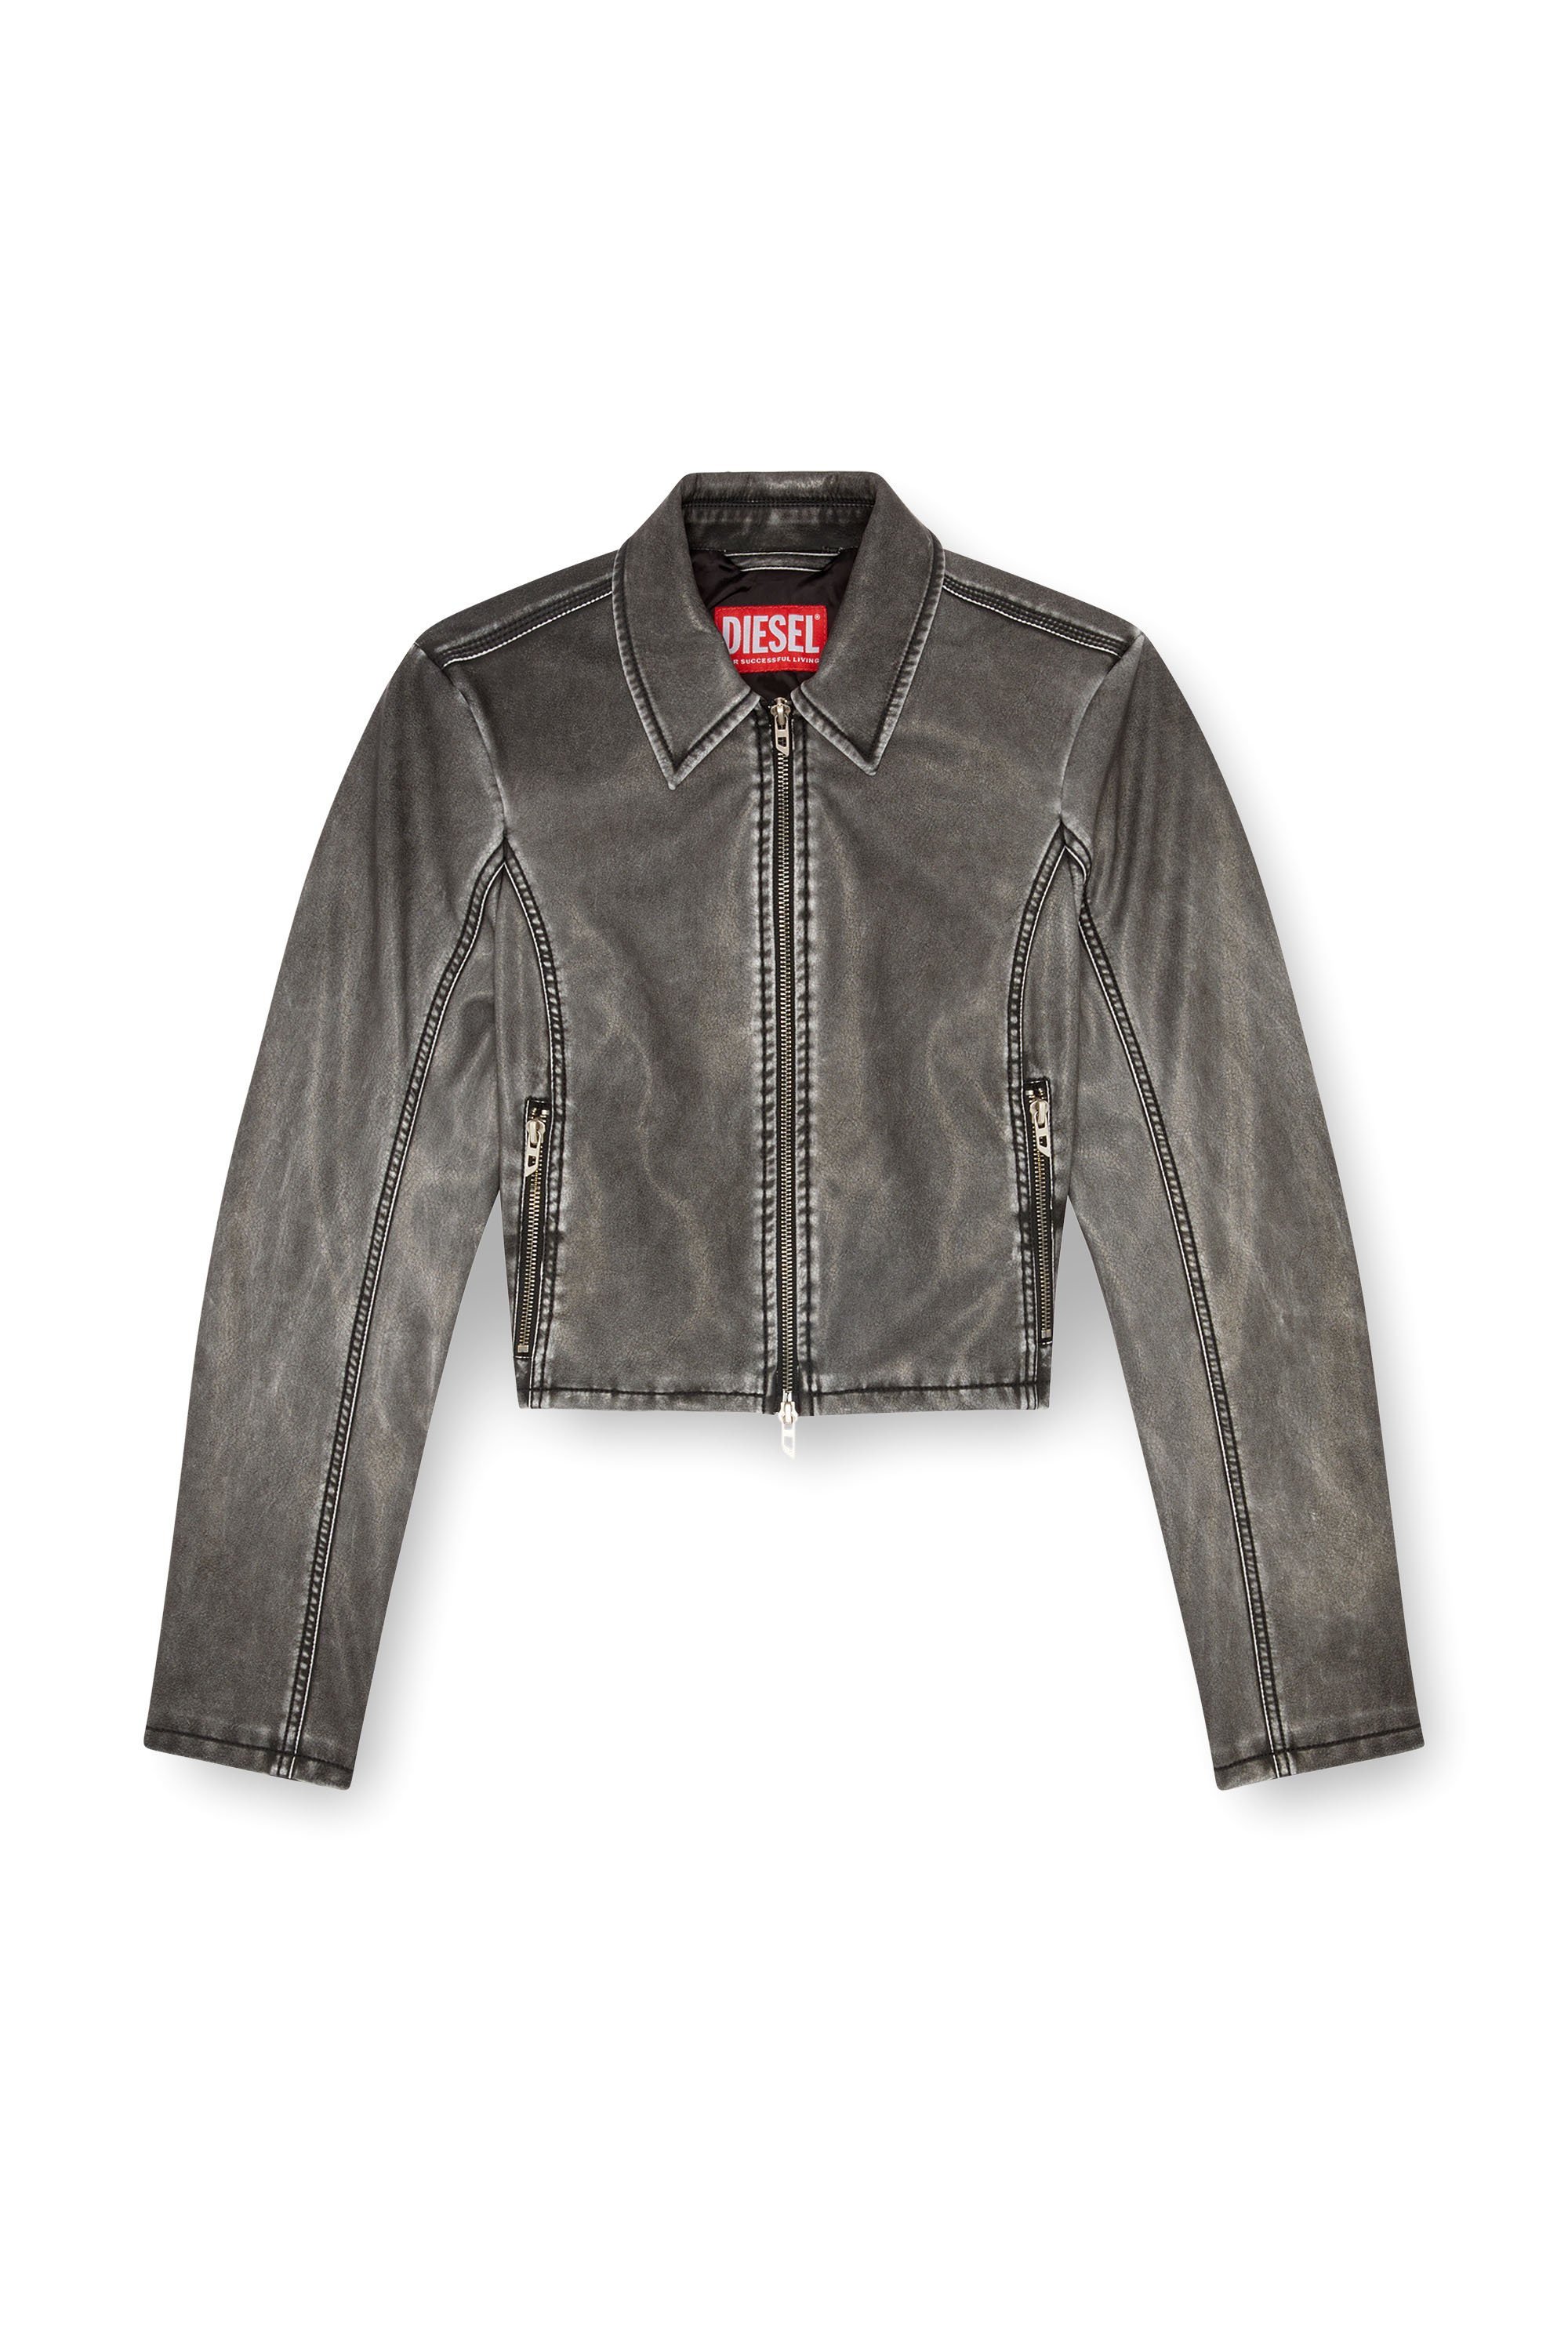 Diesel - G-OTA, Female Cropped jacket in washed tech fabric in Black - Image 5